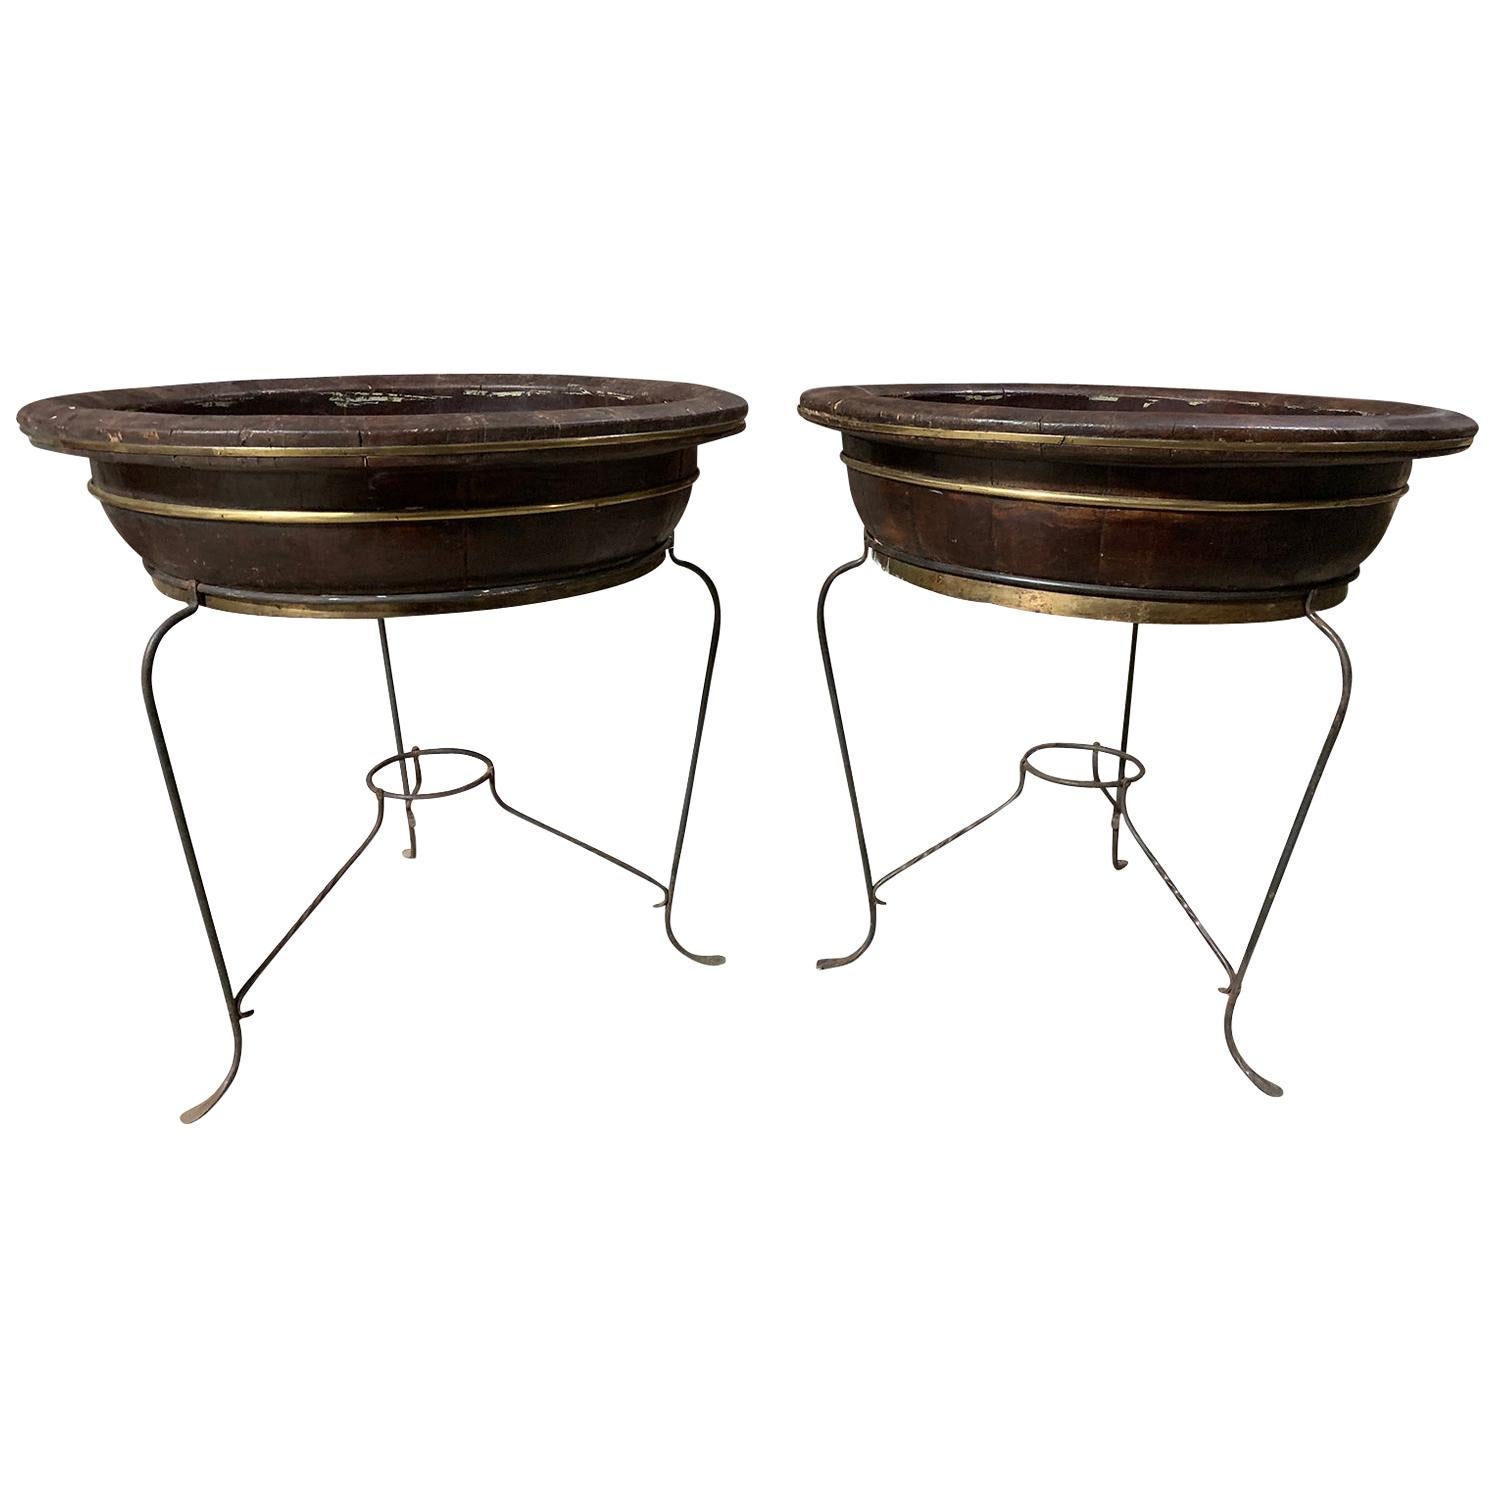 Pair of 20th Century Asian Round Wooden Planters on Custom Metal Stands